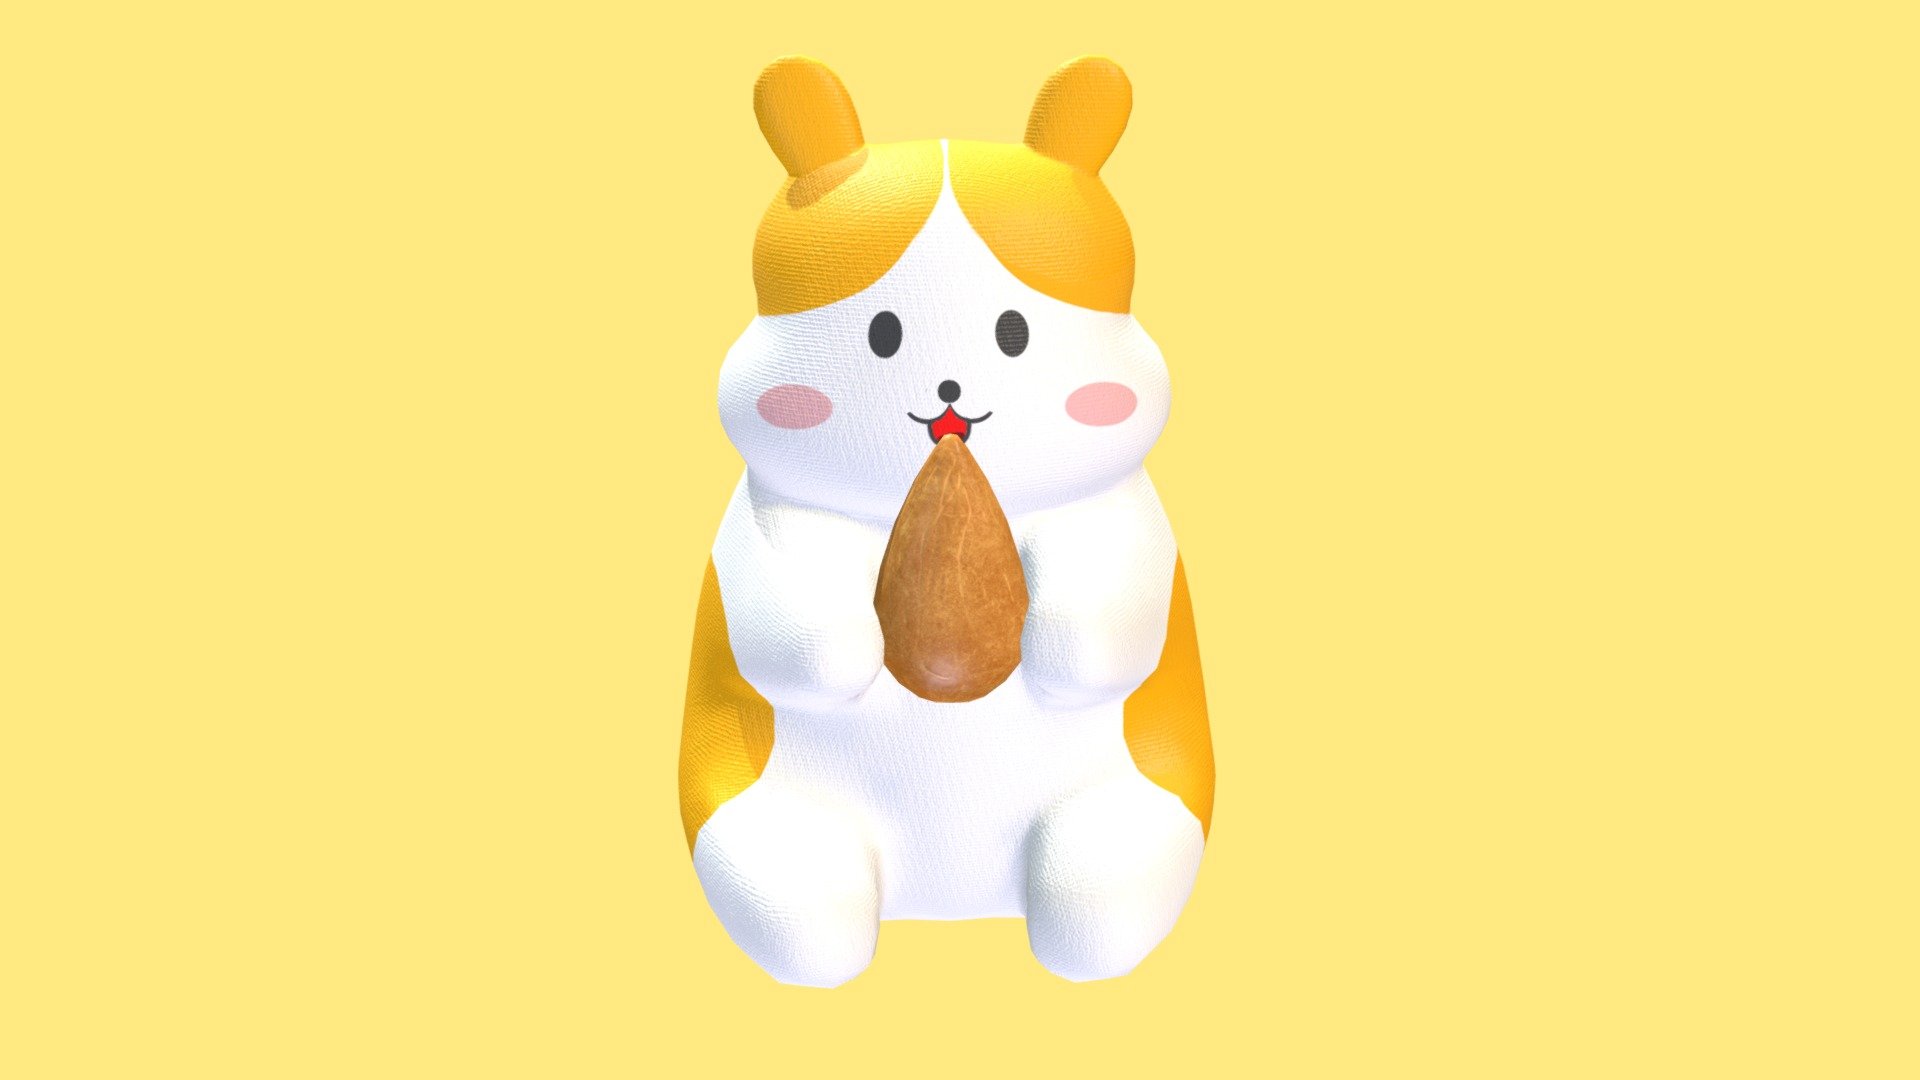 Welcome to my presentation of cute toy in shape of hamster. Model was made as low poly.

This asset pack contains:

Model of Cute hamster which holding Almond.

Technical information:

Texture 2048x2048 

Hamster - 2816 tris, 1408 faces, 1410 verts.

Almond - 320 tris, 160 faces, 162 verts.

Contact details:

lukas.boban123@gmail.com

07591664224

https://www.facebook.com/lukas.boban/

Thank you for taking look please consider leave like.

Model will be free till 14/05/2021 3d model